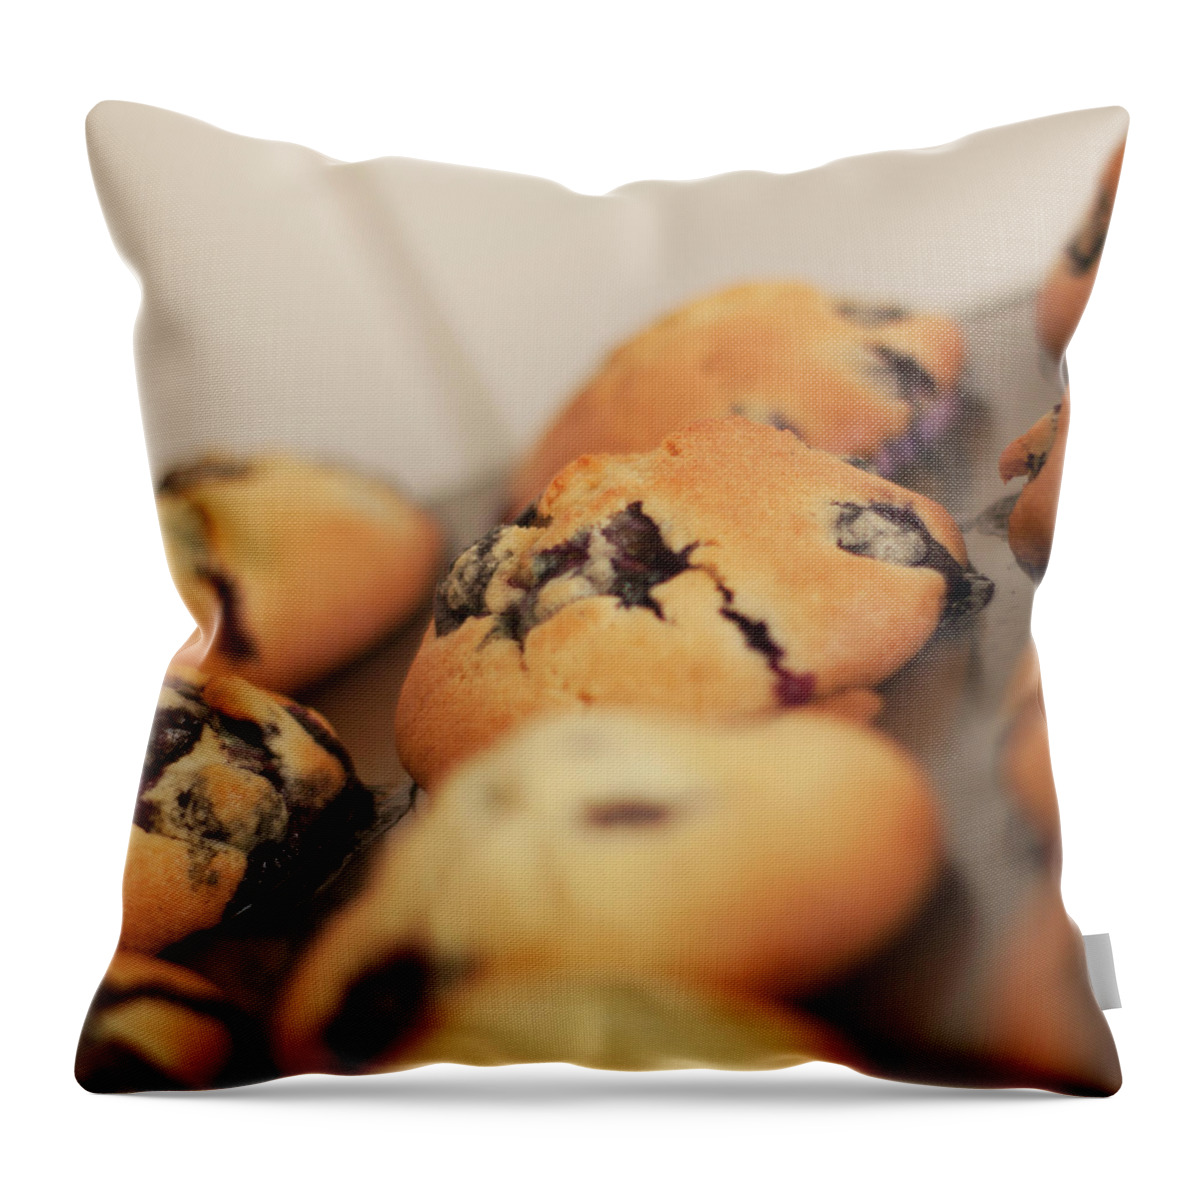 Close-up Throw Pillow featuring the photograph Blueberry Muffins by Elsa Konig Images